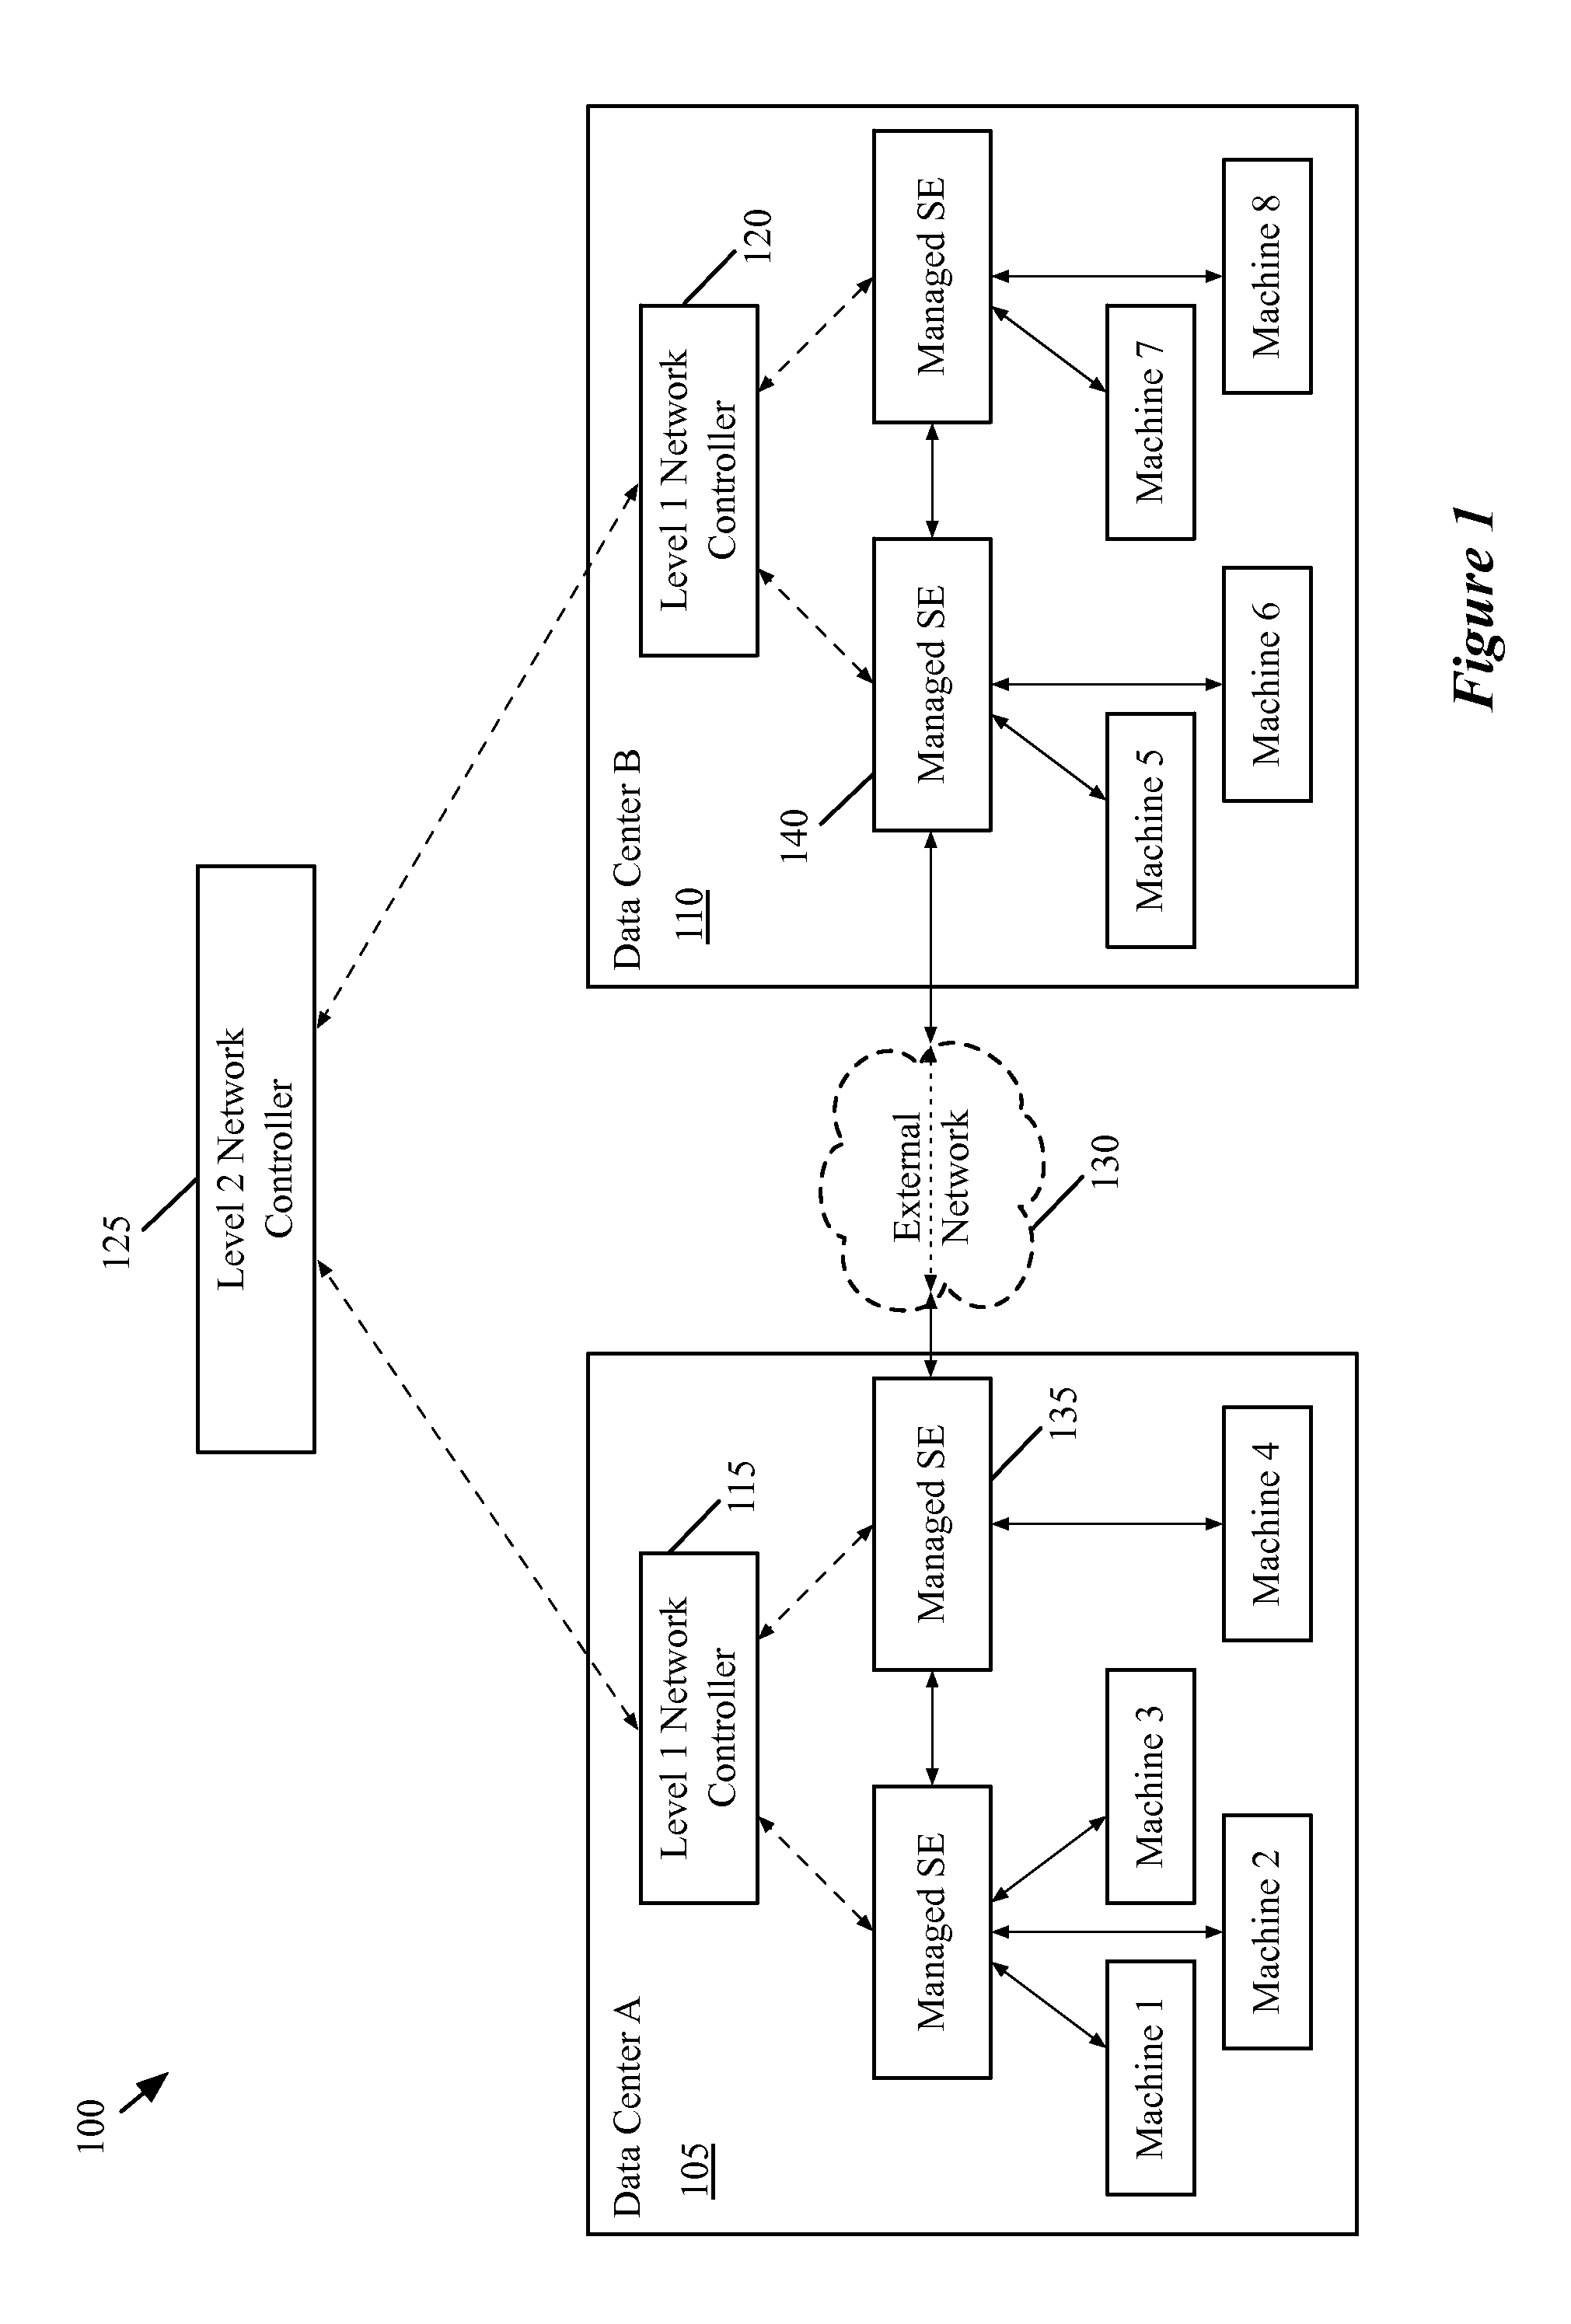 Packet processing in managed interconnection switching elements